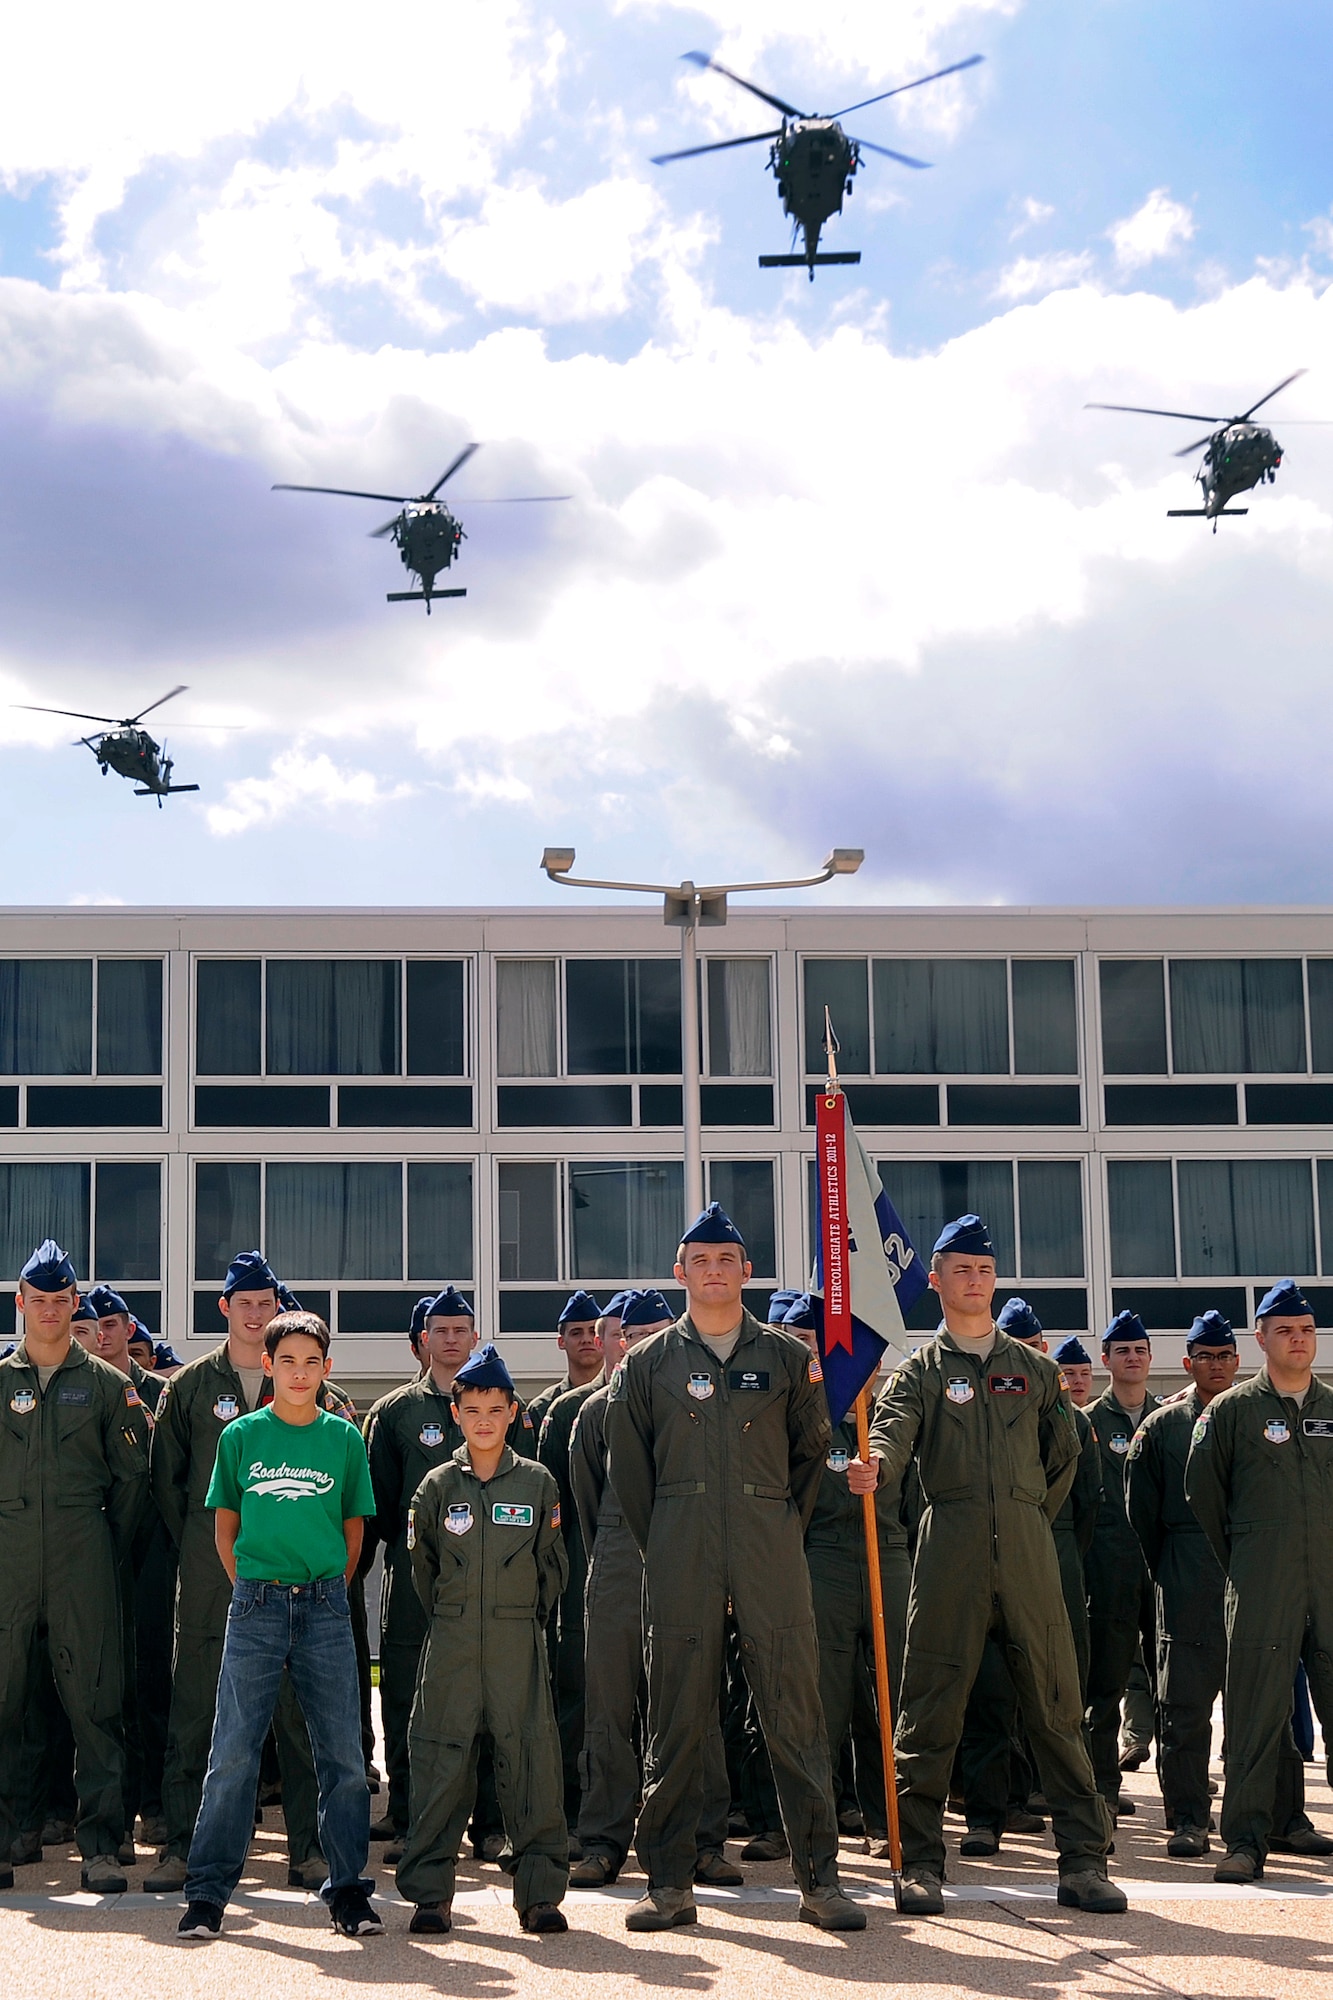 Wyatt Denton (center) and his brother Joe (left) stand on the Terrazzo with Cadet Squardron 32, Sept. 28. HH-60 Pave Hawk helicopters from the 34th Weapons Squadron at Nellis Air Force Base, Nev., flew over the noon meal formation. Wyatt is a native of Parker, Colo. (U.S. Air Force photo/Sarah Chambers)